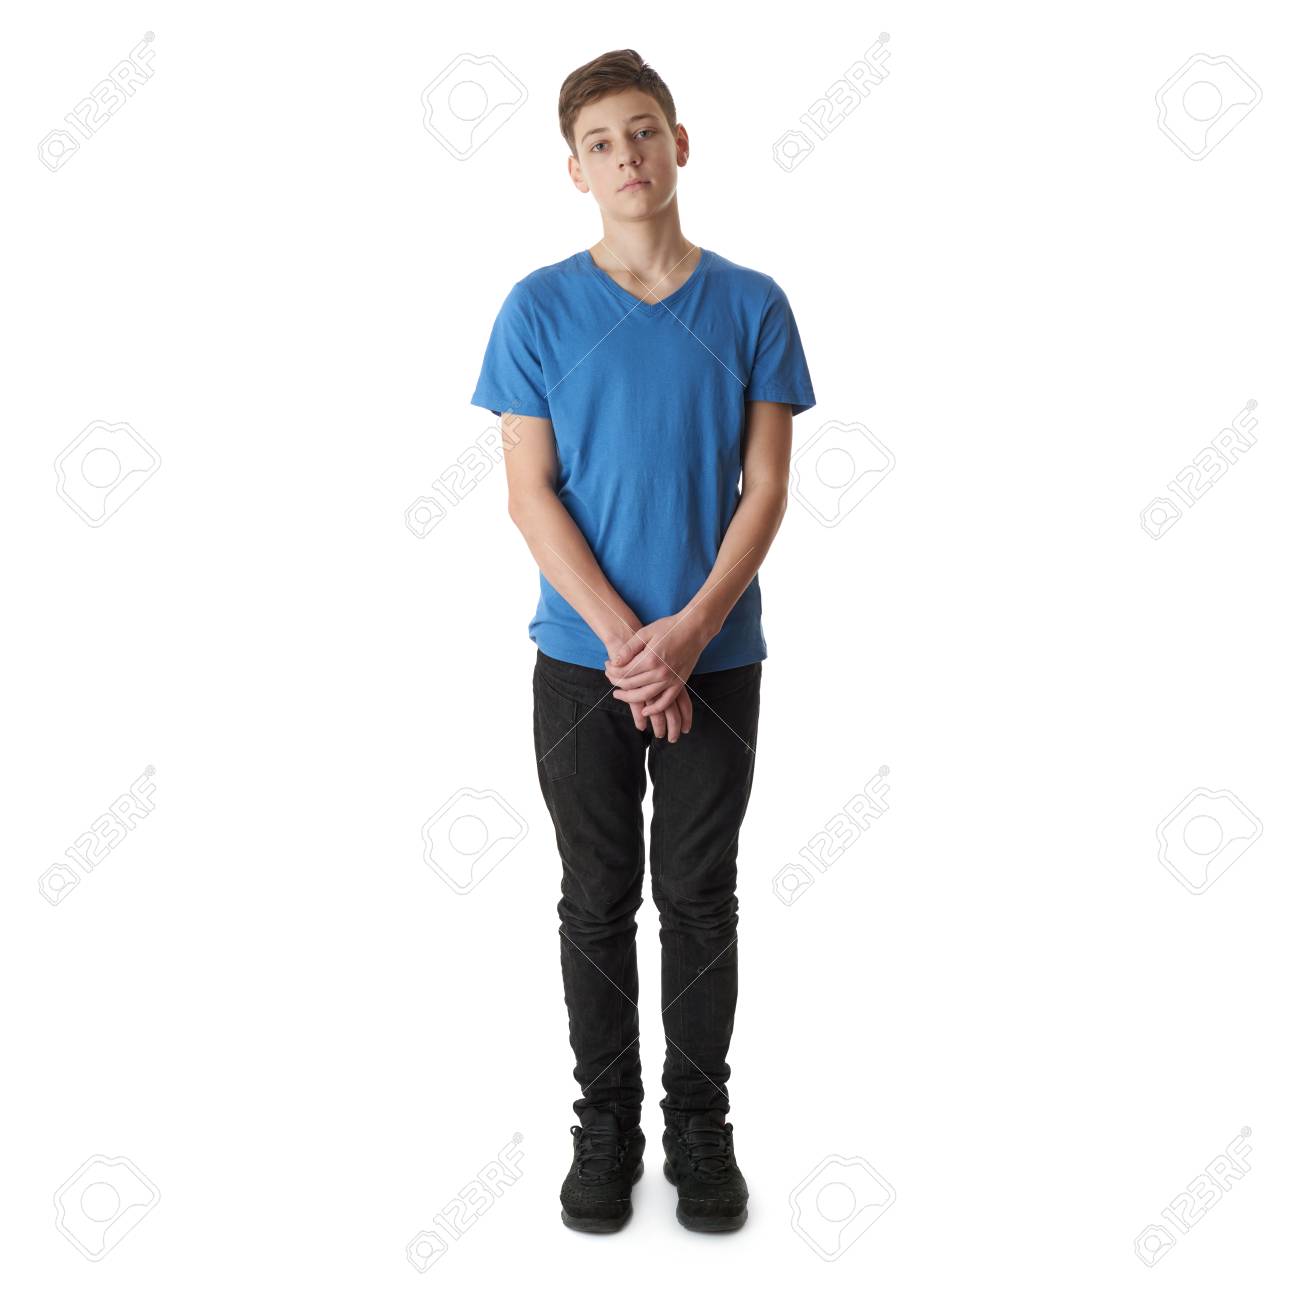 58115912-cute-teenager-boy-in-blue-t-shirt-standing-over-white-isolated-background-full-body.jpg